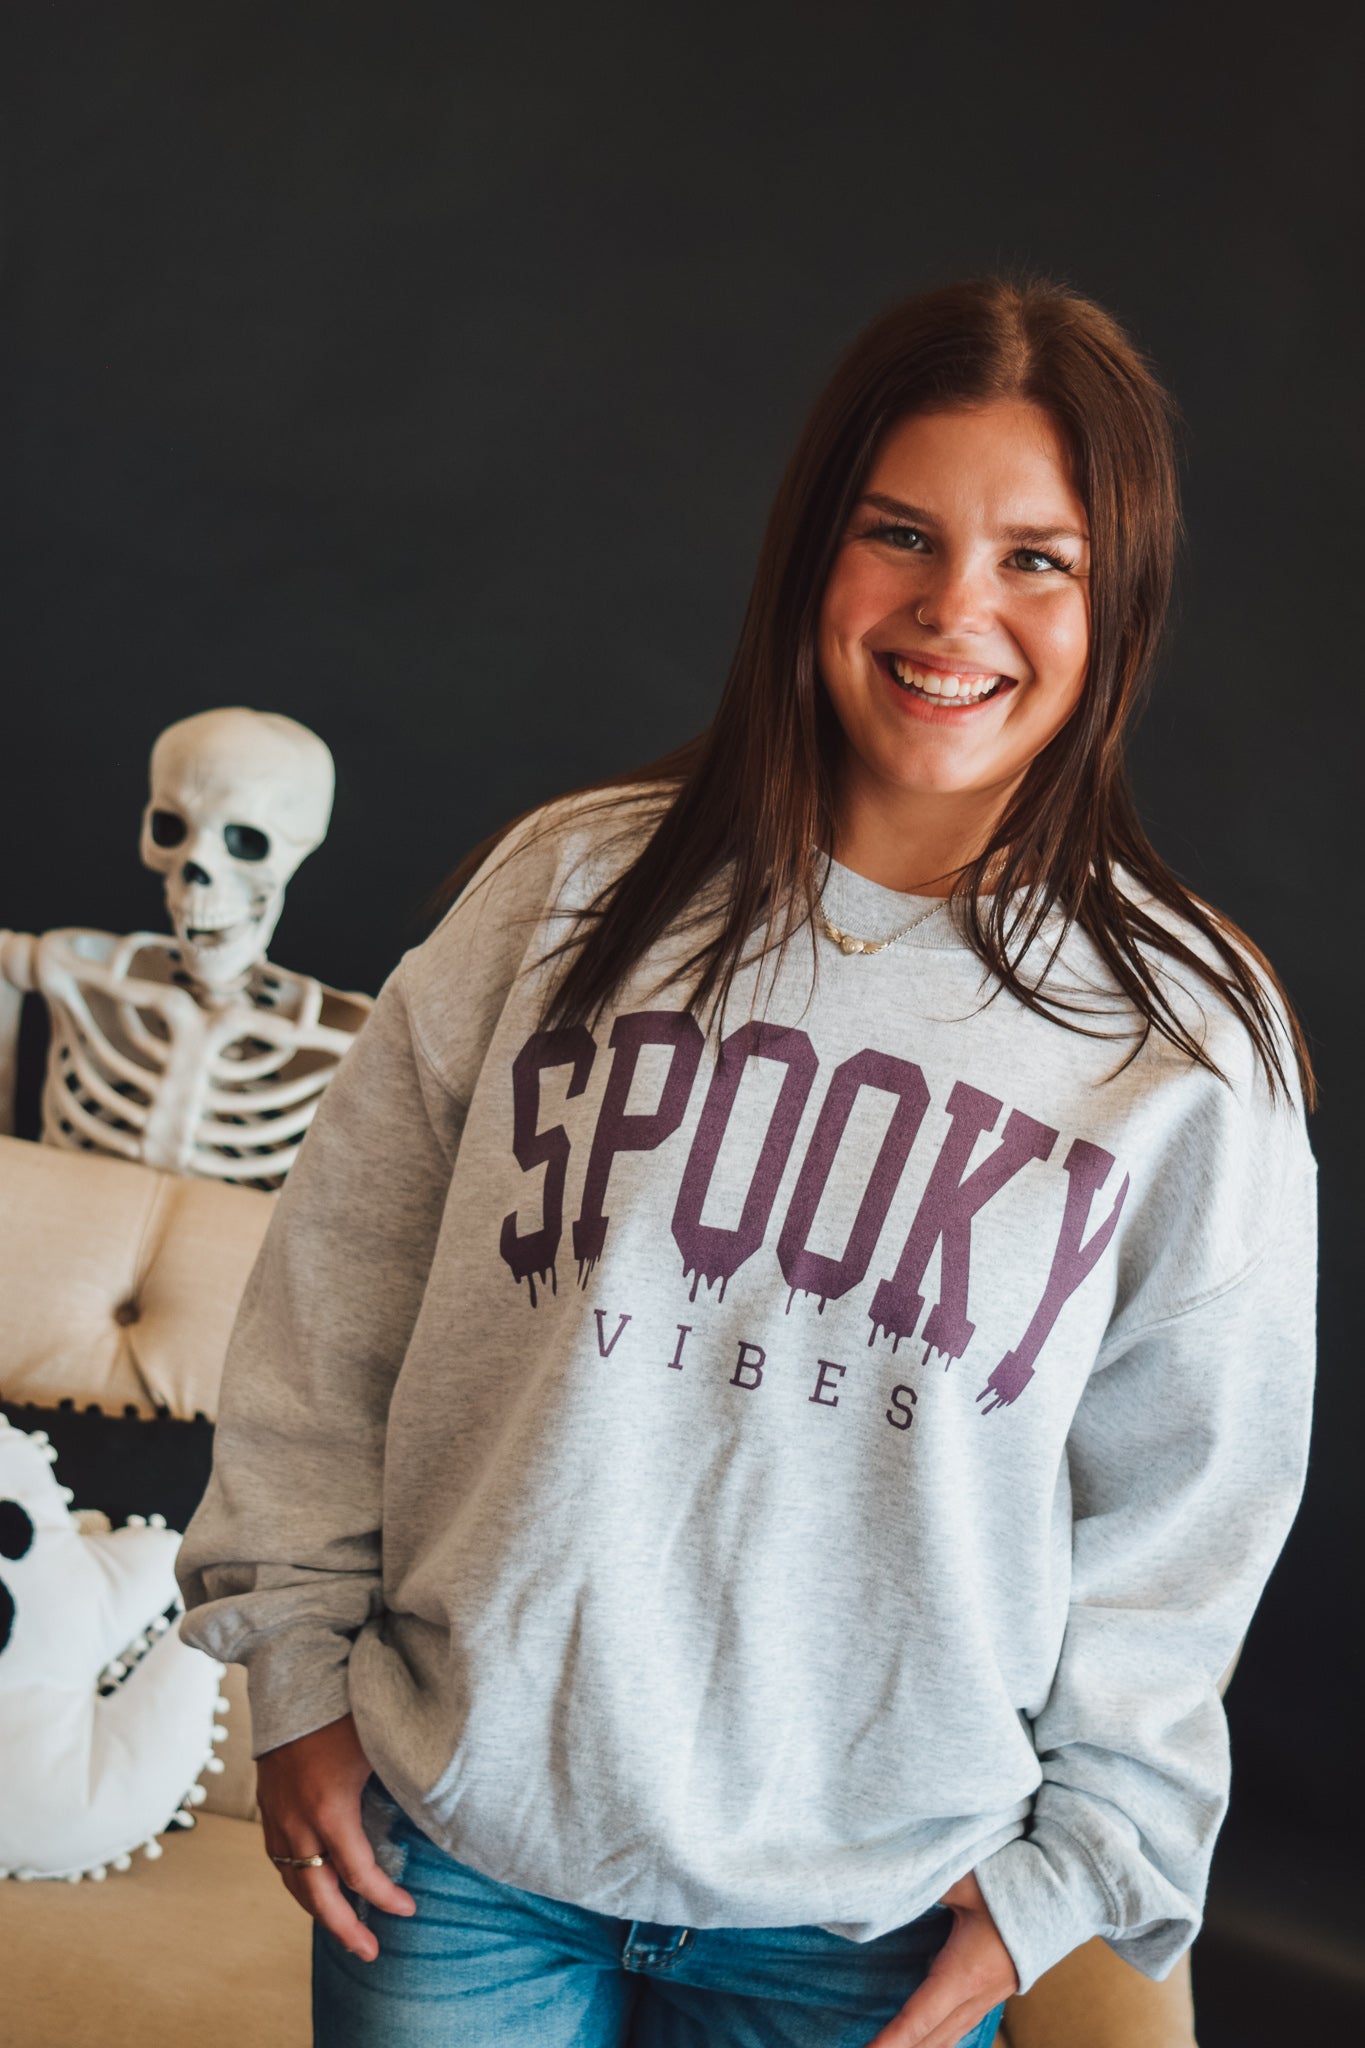 SPOOKY VIBES SWEATER